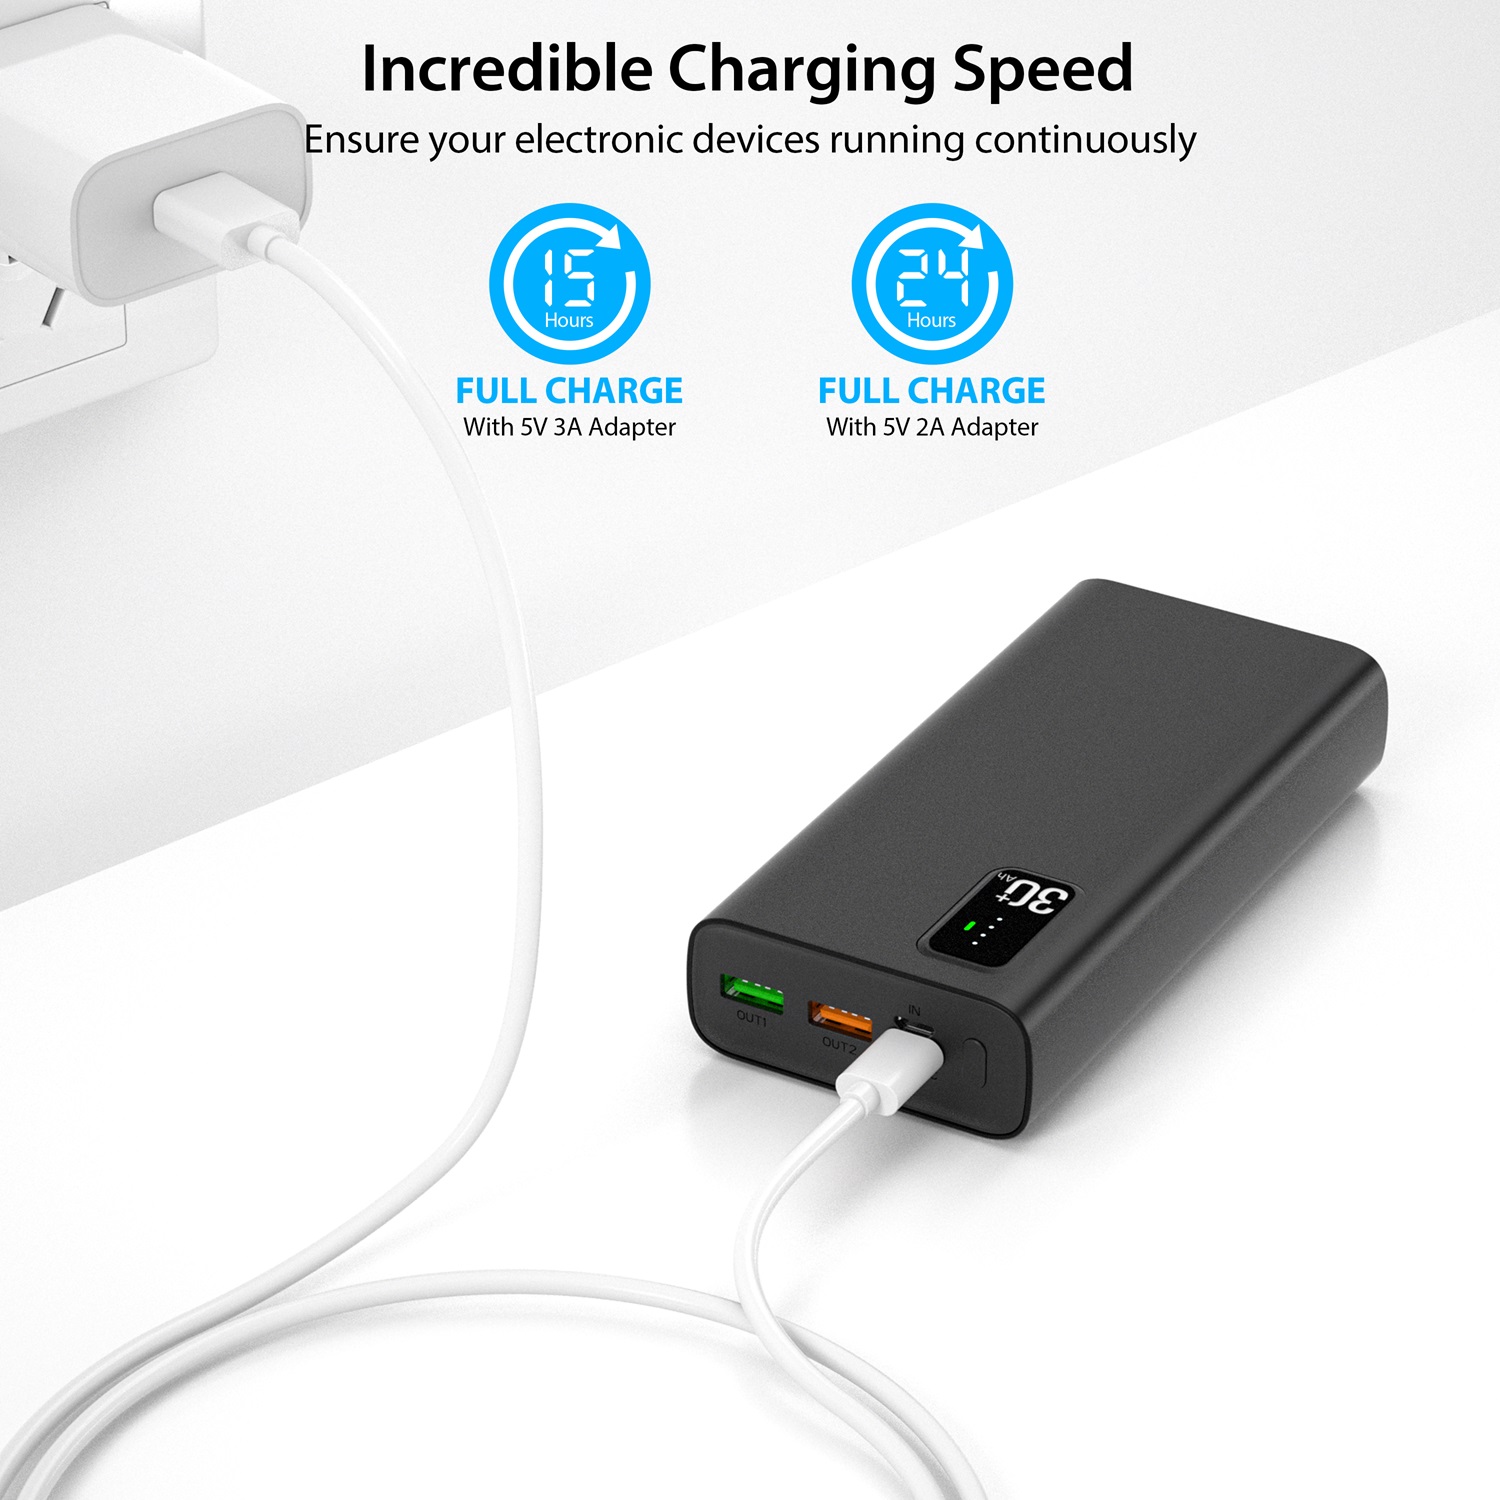 Toospon- Power Bank, 26800mAh Fast Charging, QC3.0 22.5W & USB C PD20W, Portable Charger, External Battery Pack, 2 Inputs and 3 Outputs(USB & Type C) For iphone, ipad, Samsung, Huawei, Smartphones etc.